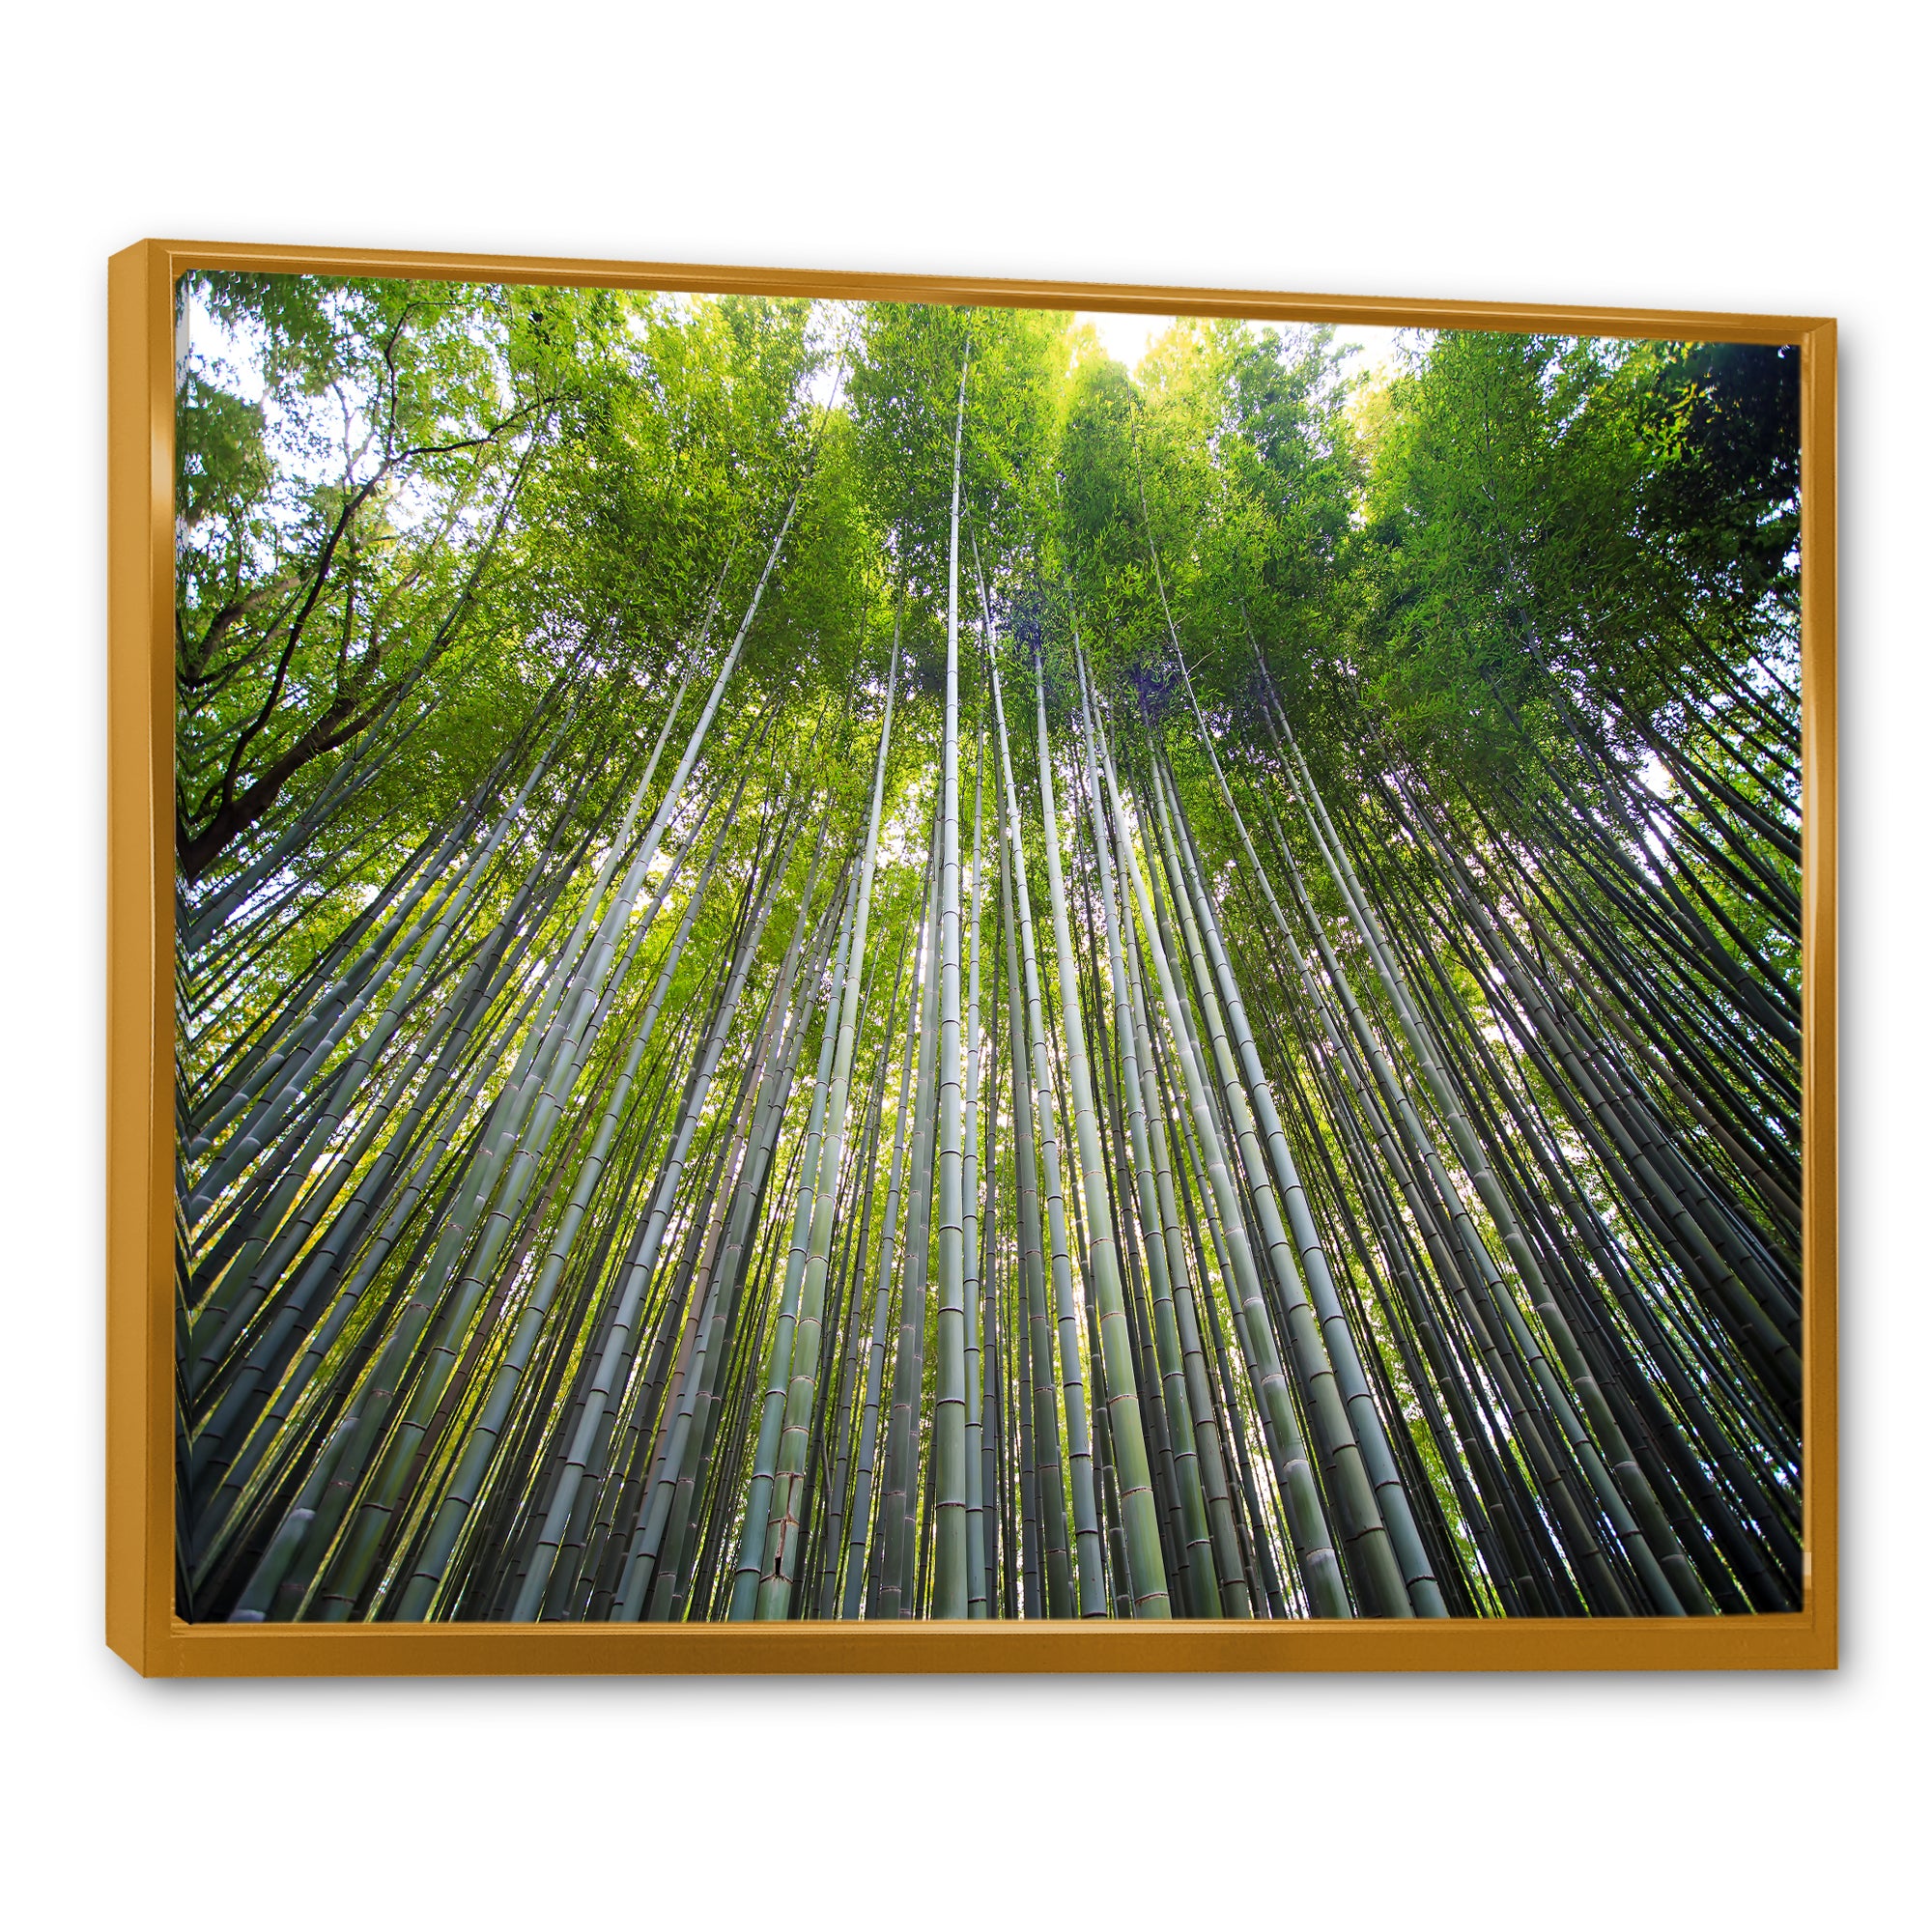 Bamboo forest of Kyoto Japan.